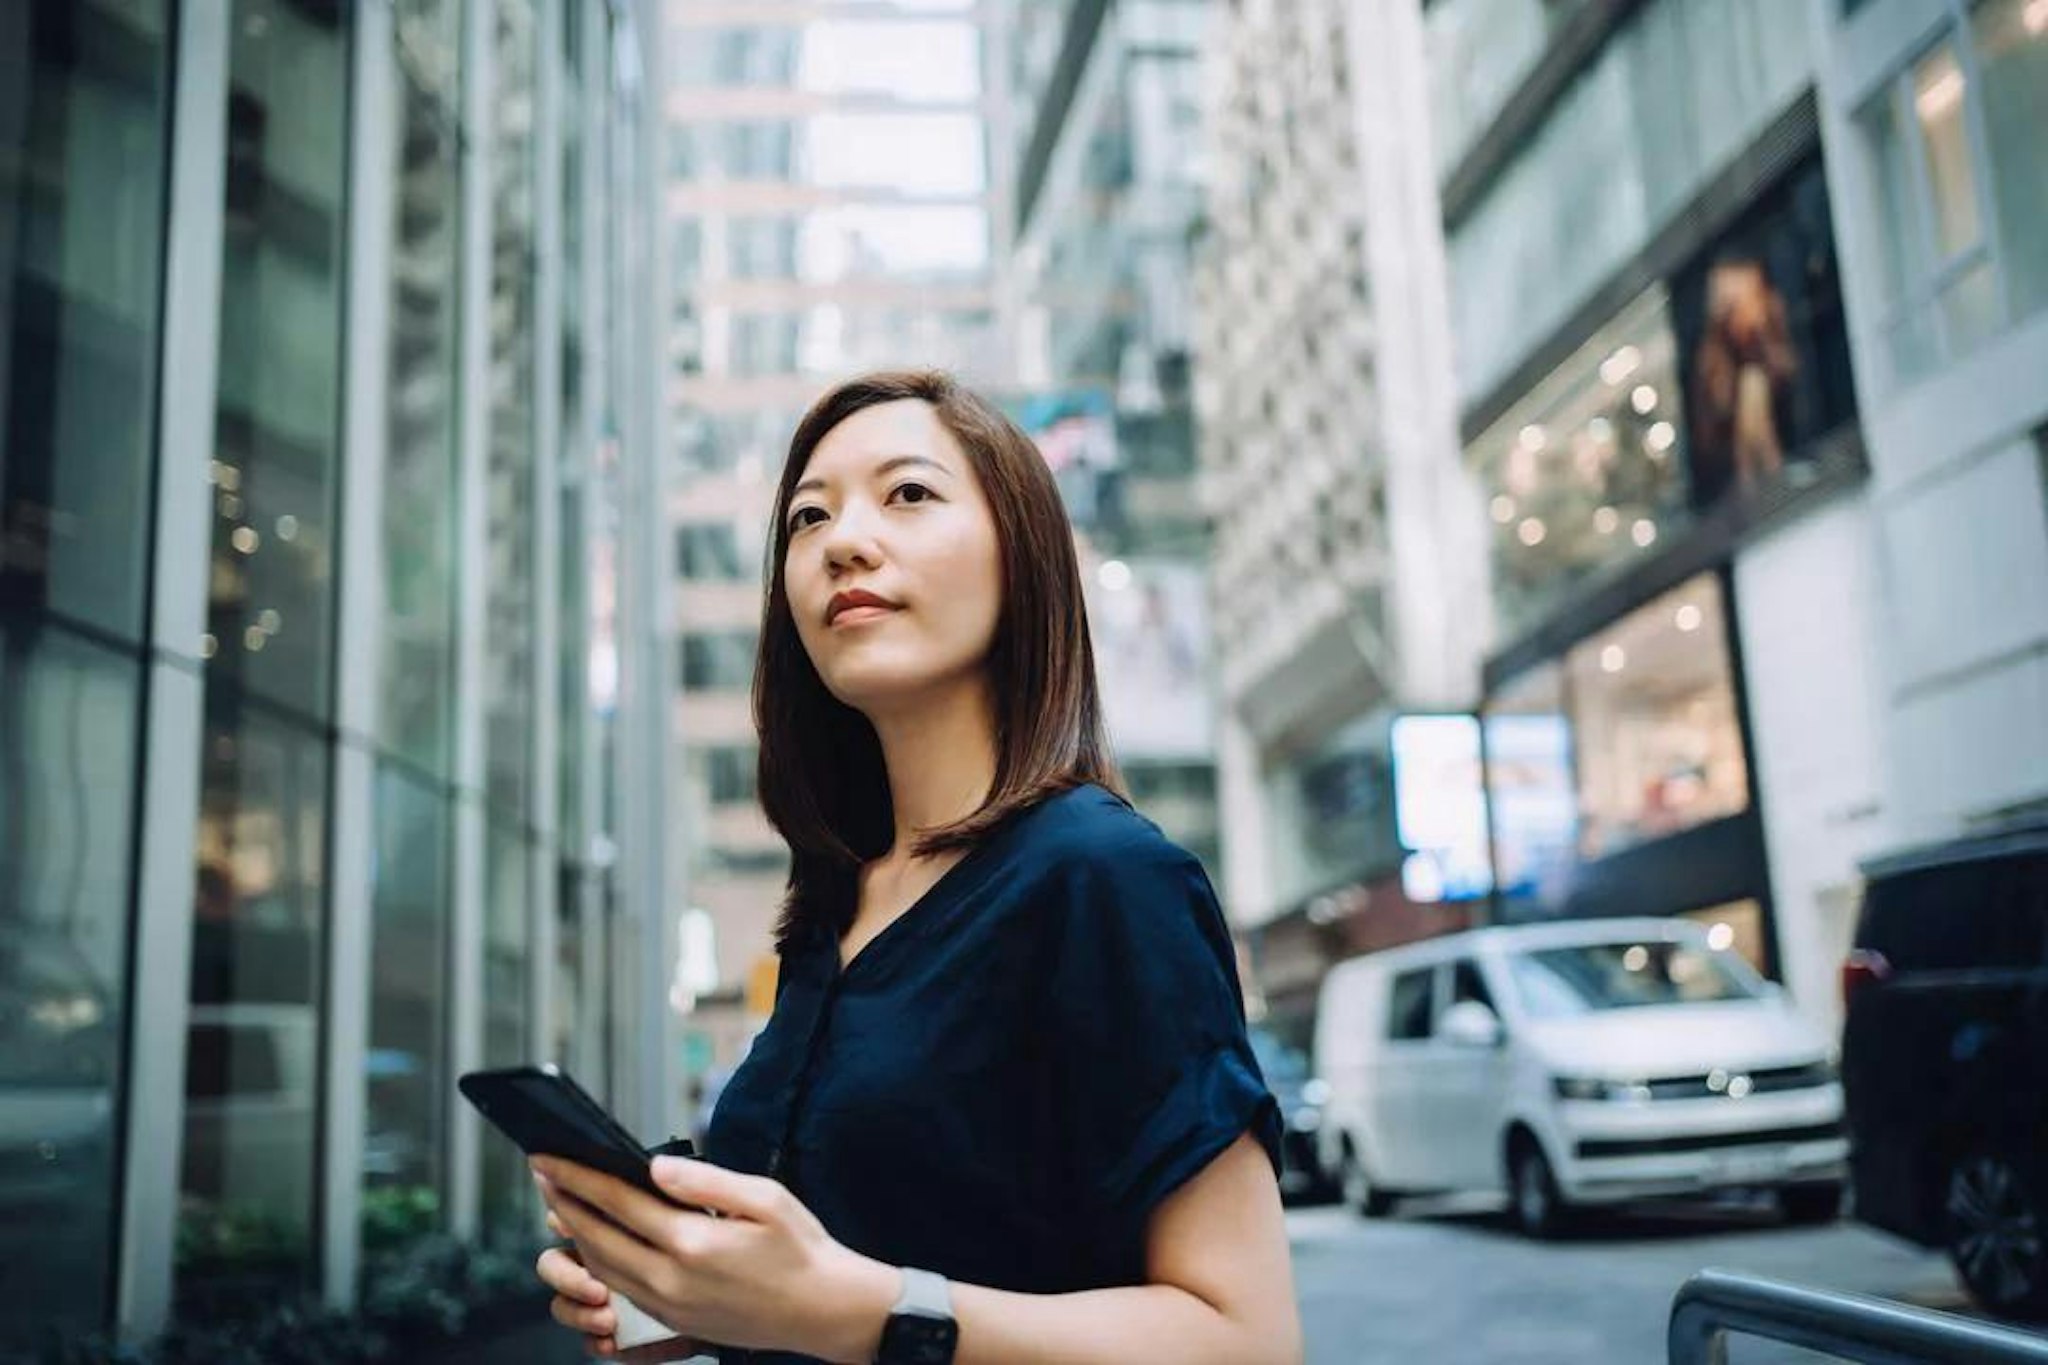 Woman stands in a city street holding her phone